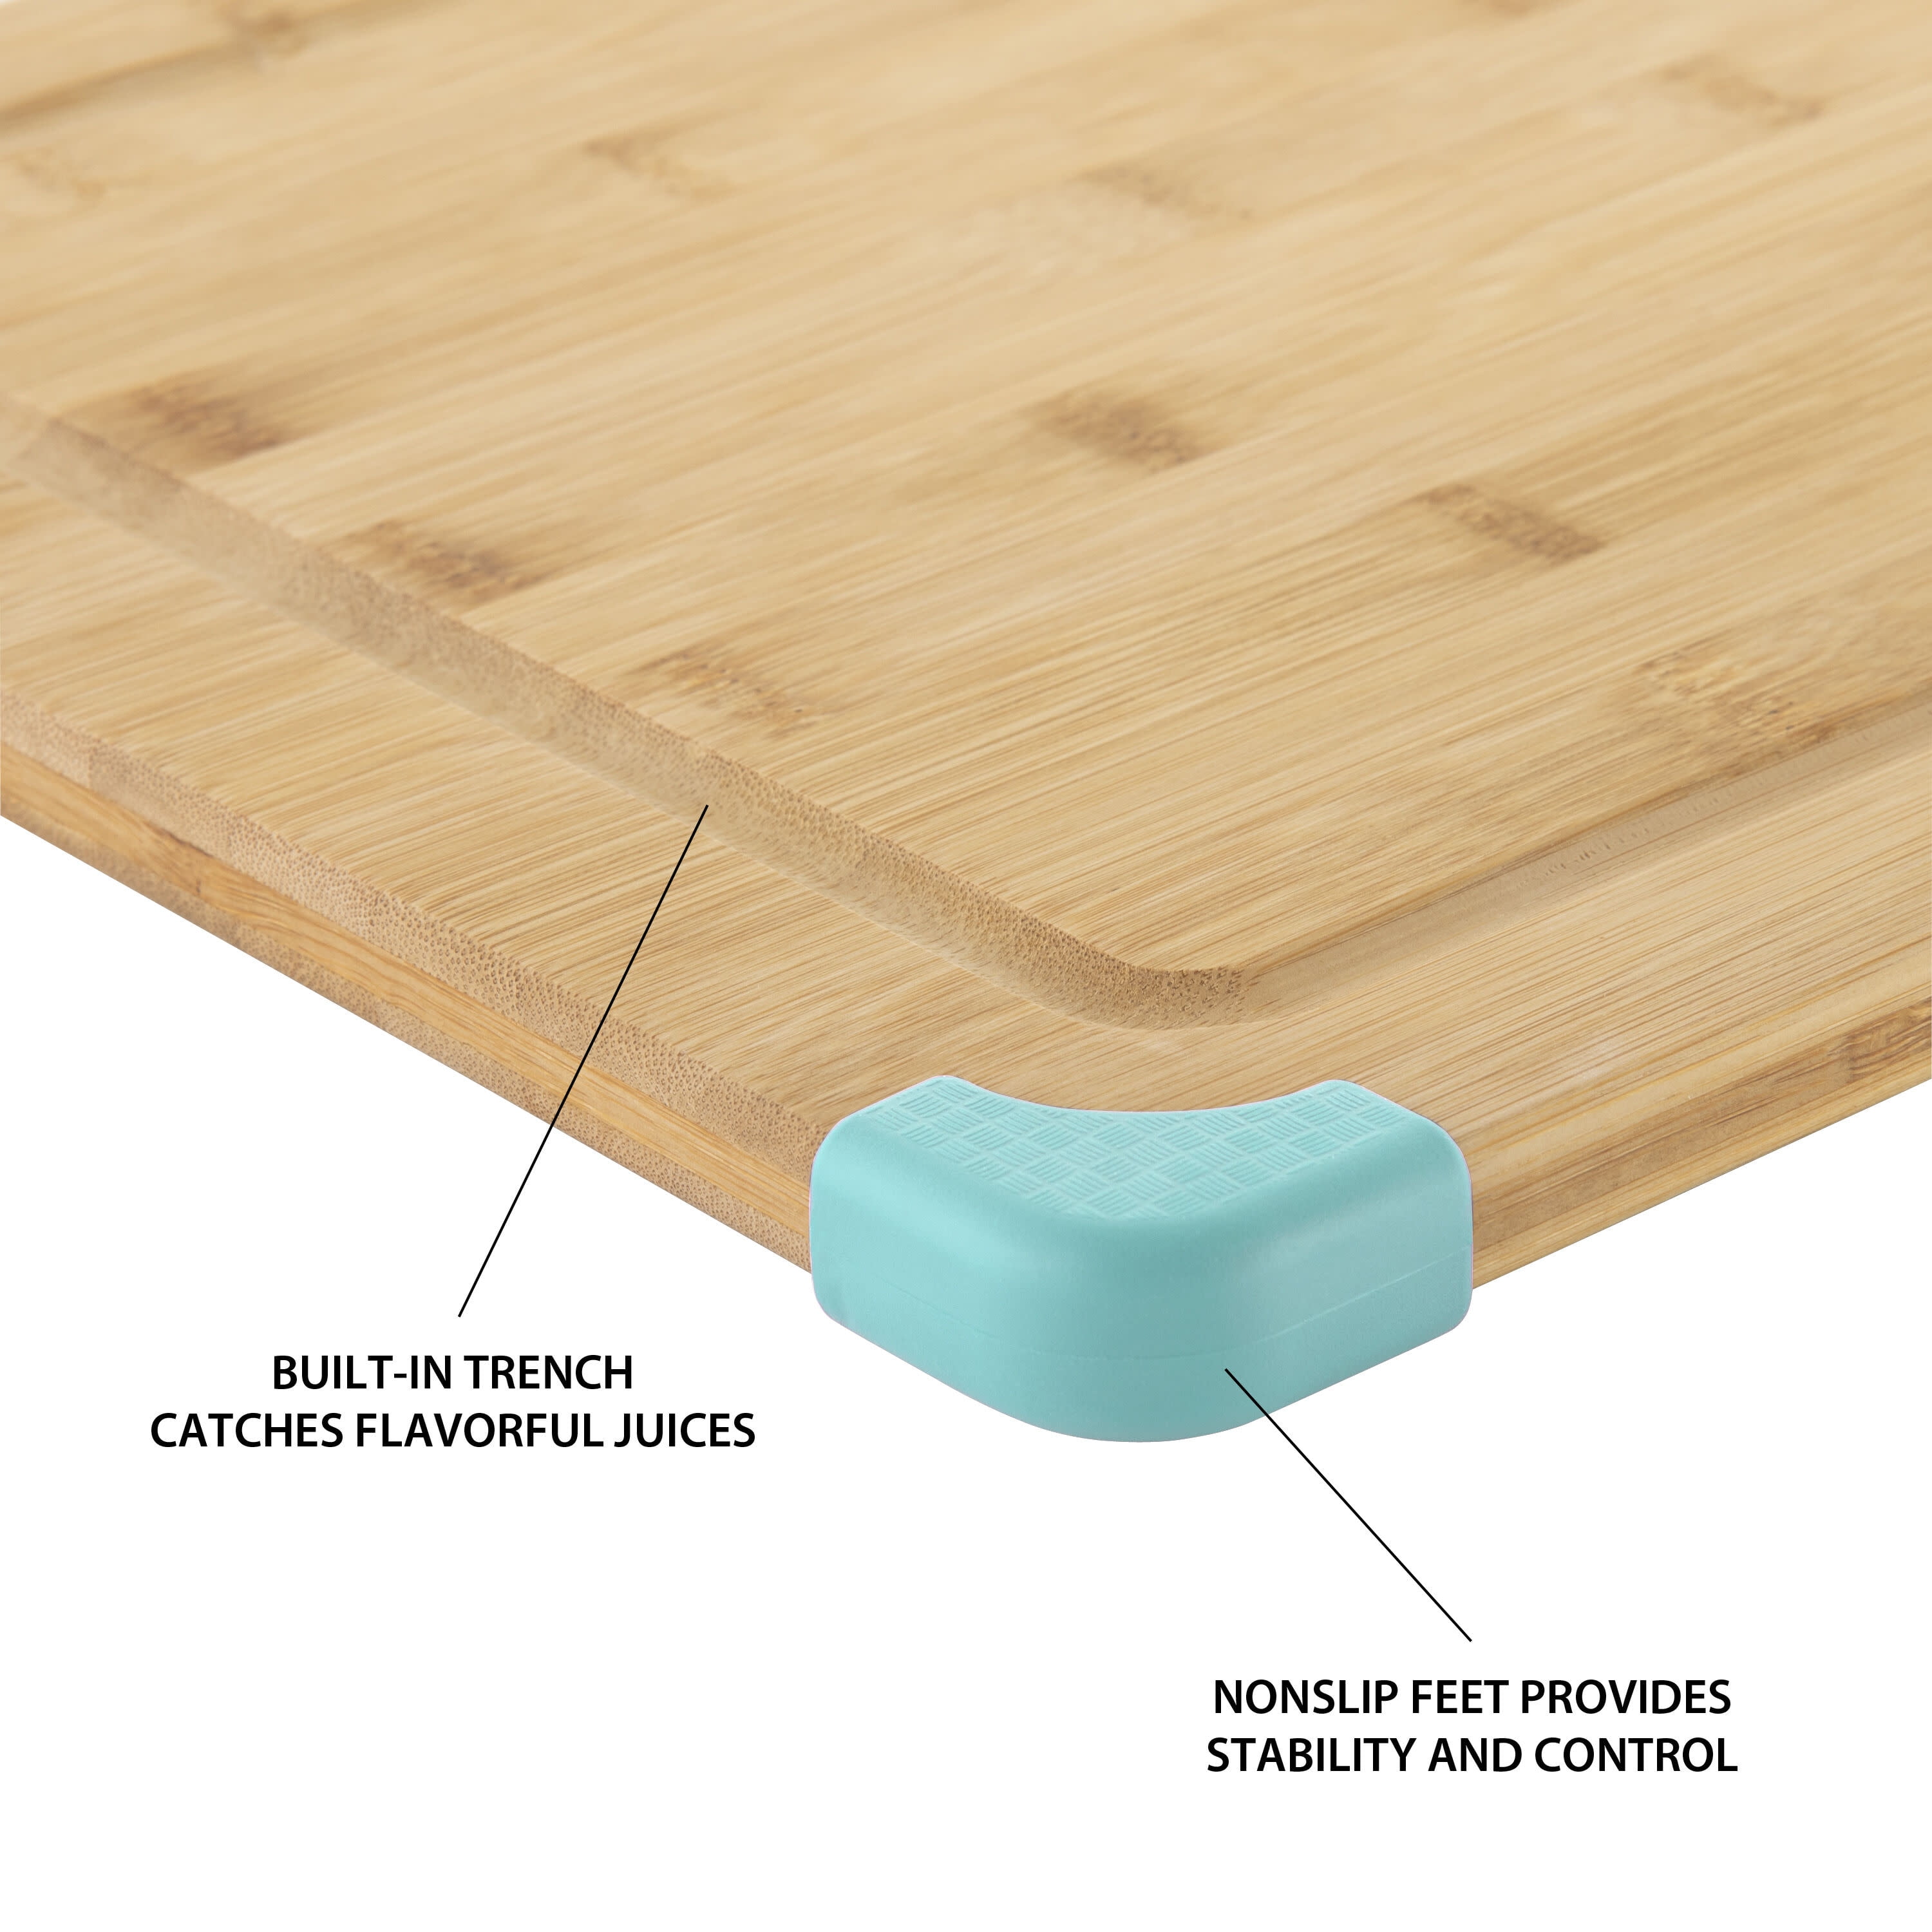 Non-Slip Bamboo Cutting Board, Blue Sold by at Home